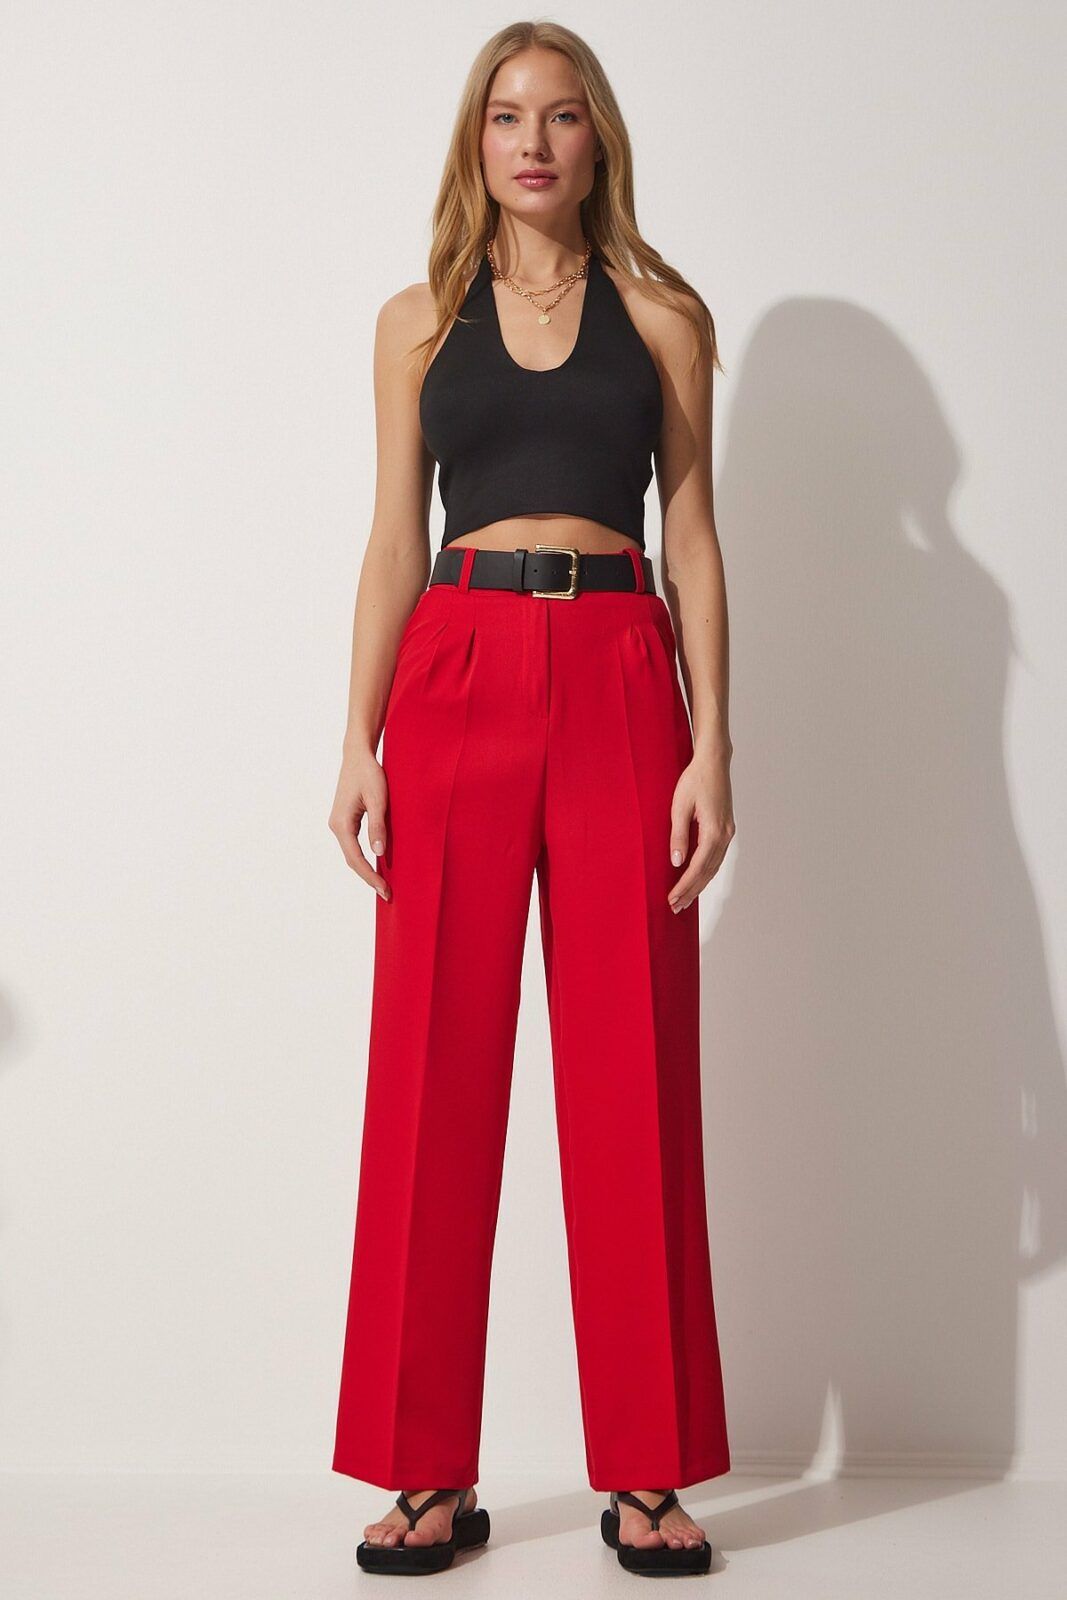 Happiness İstanbul Pants - Red